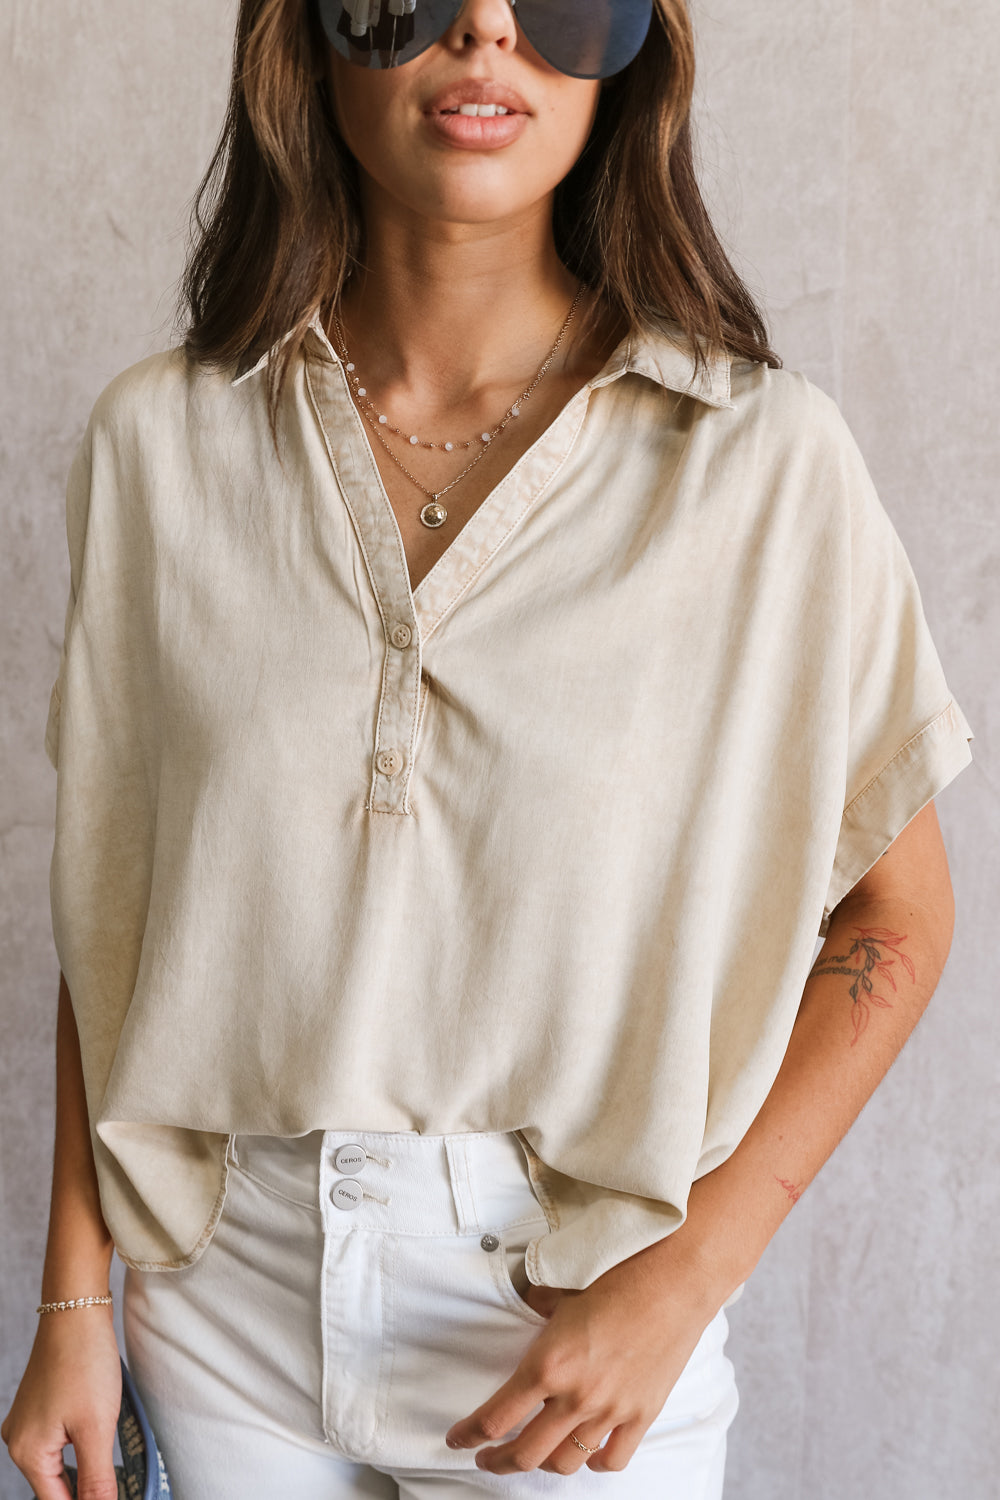 front view of female model wearing the Amalia Collared Short Sleeve Top in taupe, which has short sleeves and a collar neckline.Top is front tucked